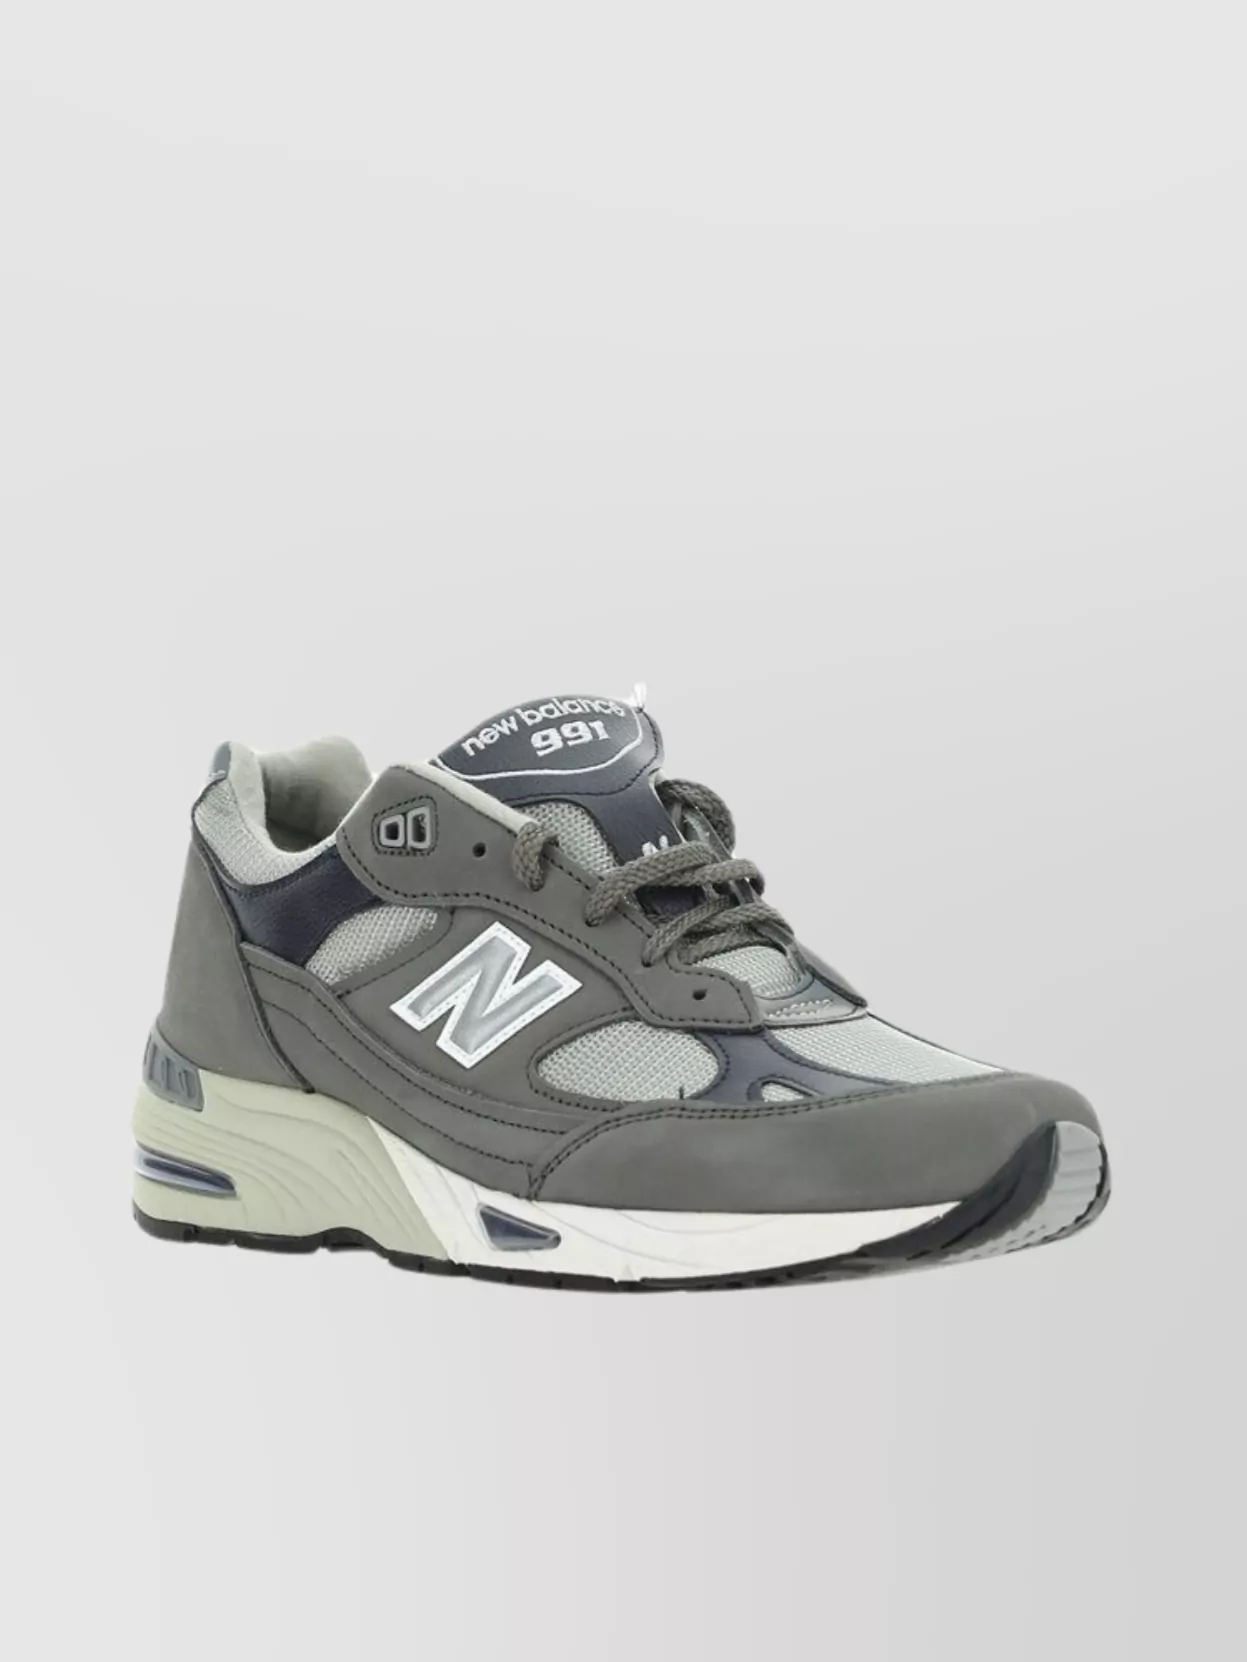 Shop New Balance 991 Sneakers With Color Block Design